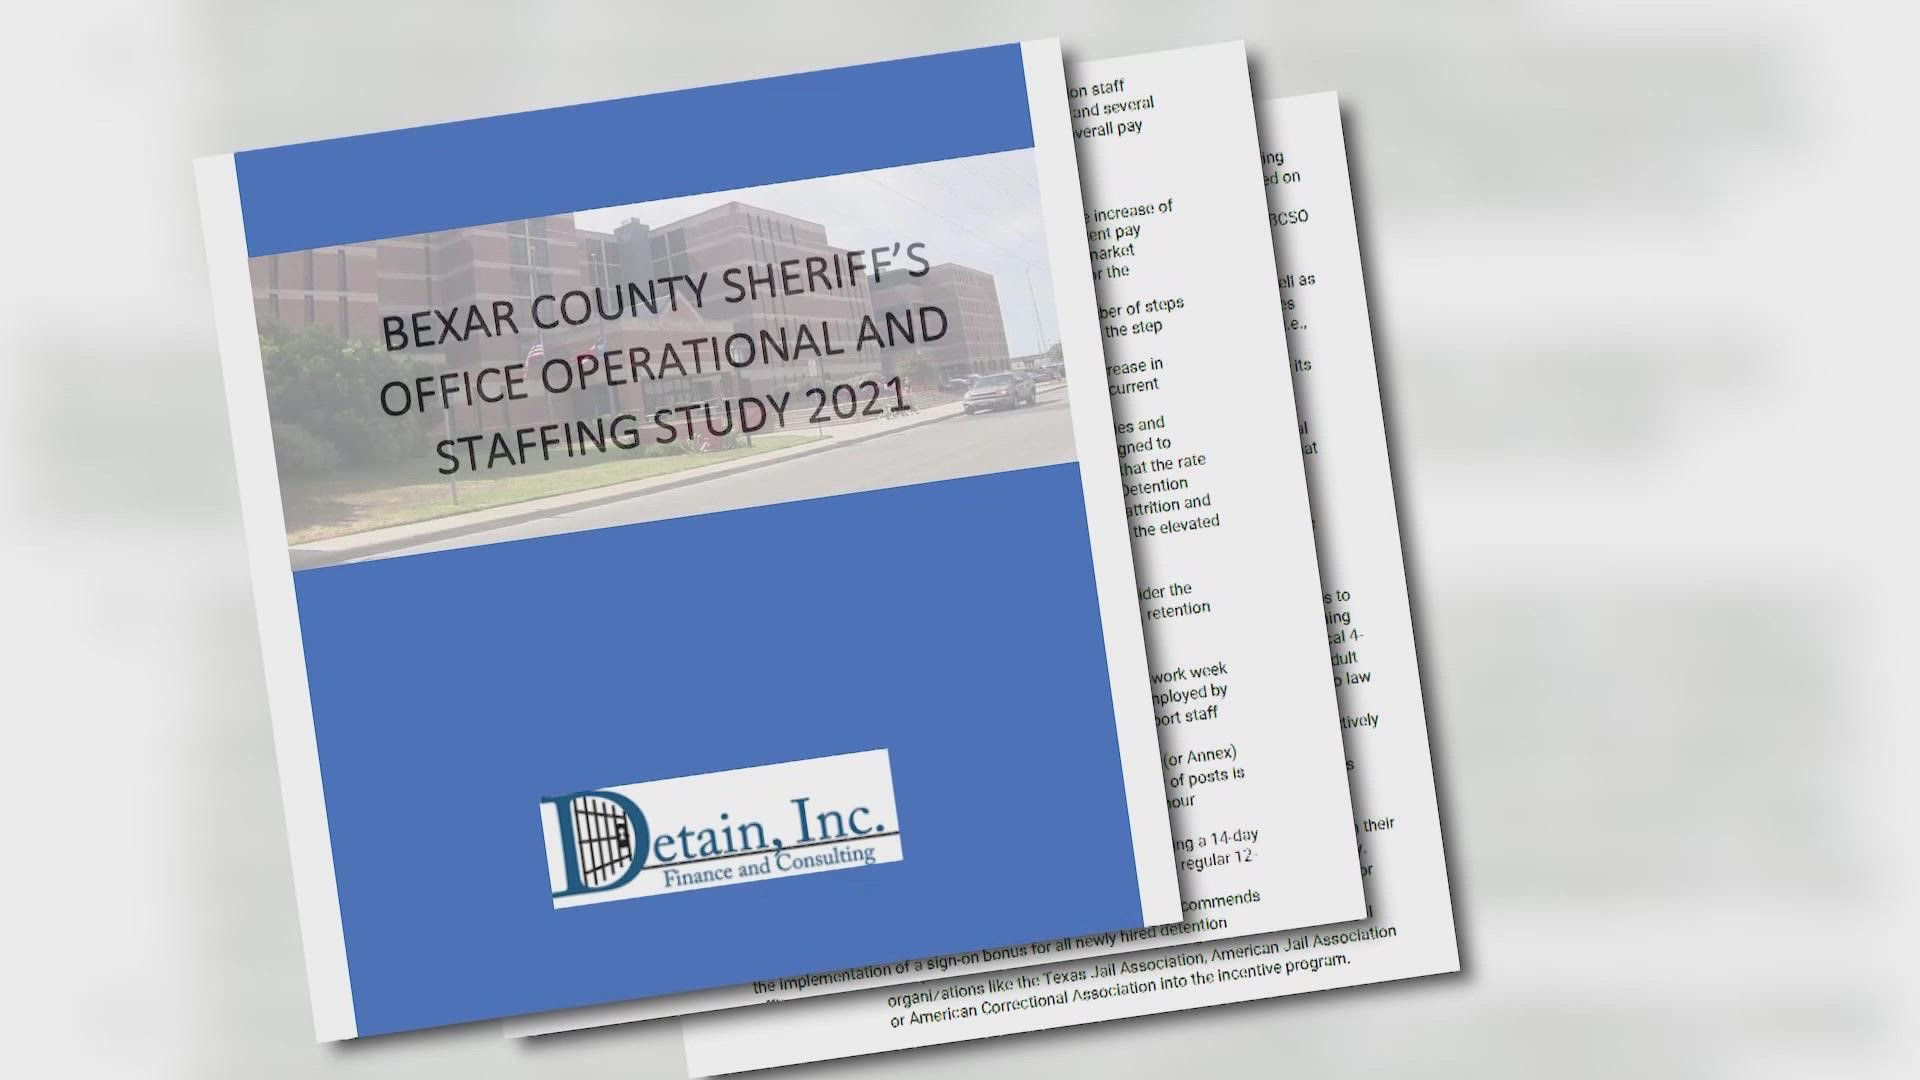 The Bexar County Sheriff's Office sent the report, which displays many of the problems we're reported on in the past.